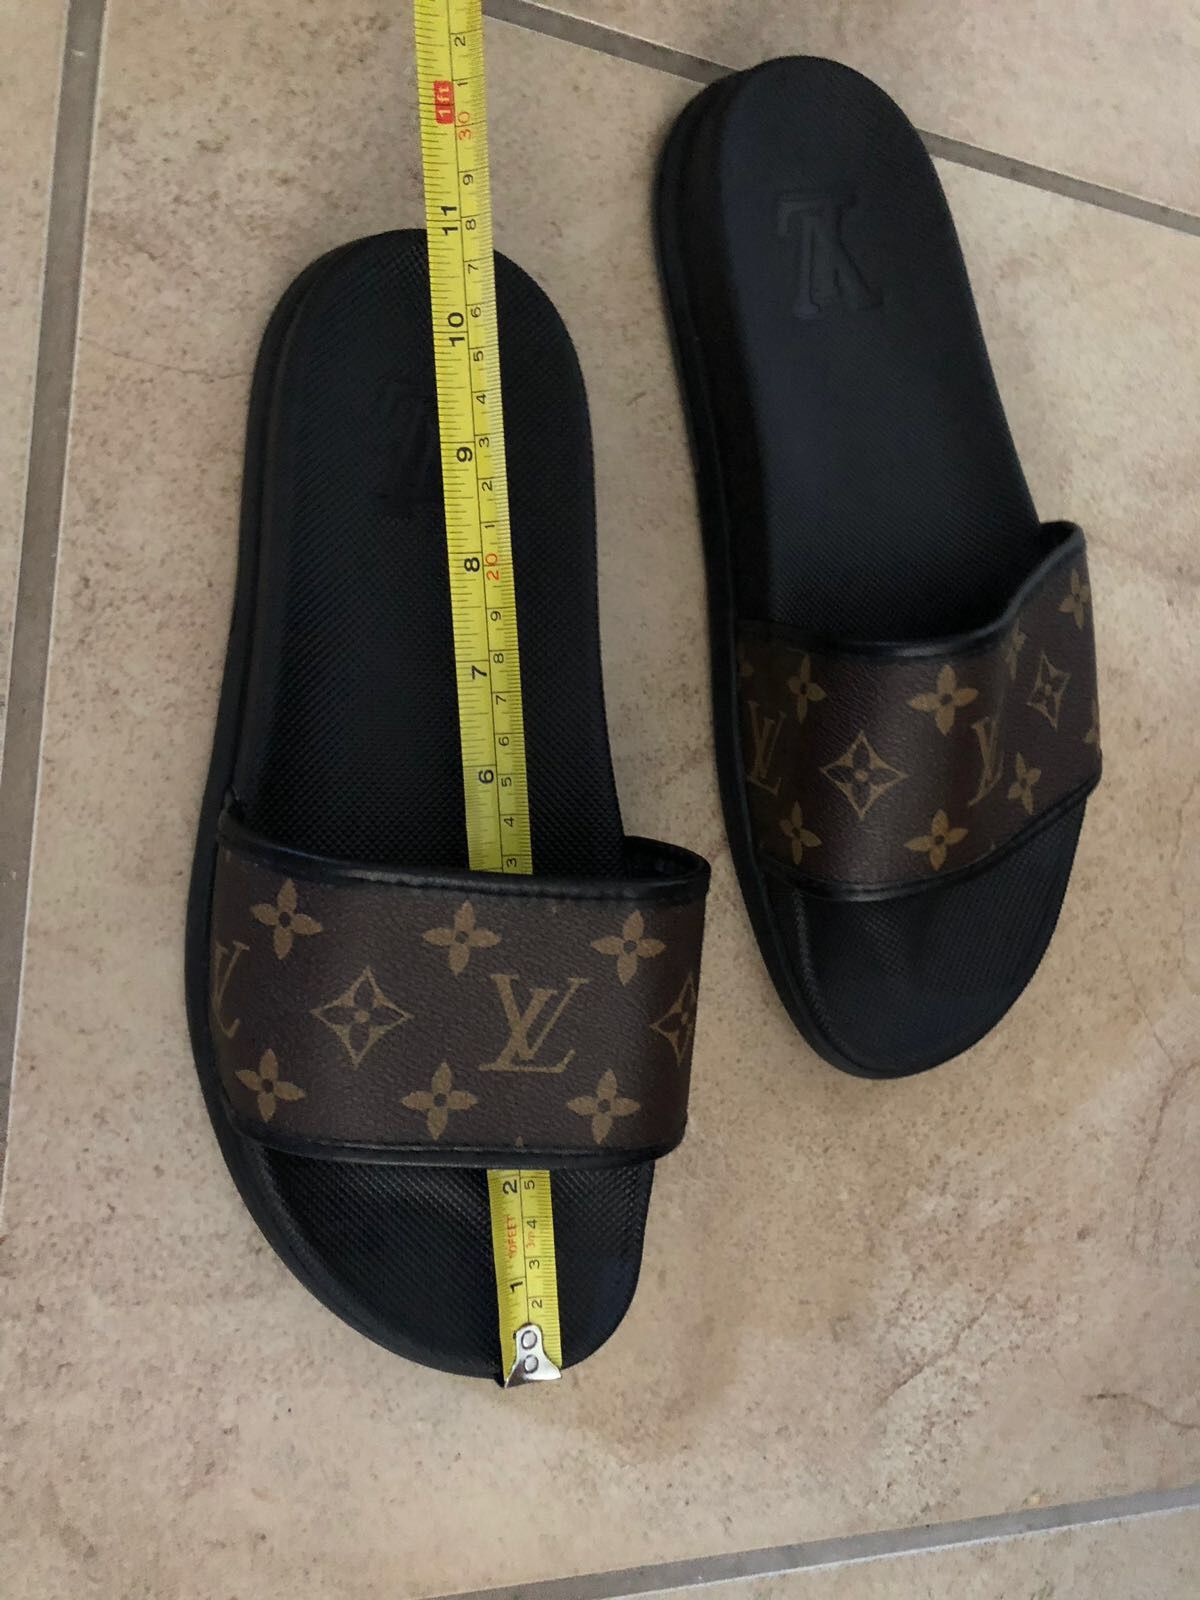 Louis Vuitton Slides Mule Waterfront for Sale in Fresno, CA - OfferUp